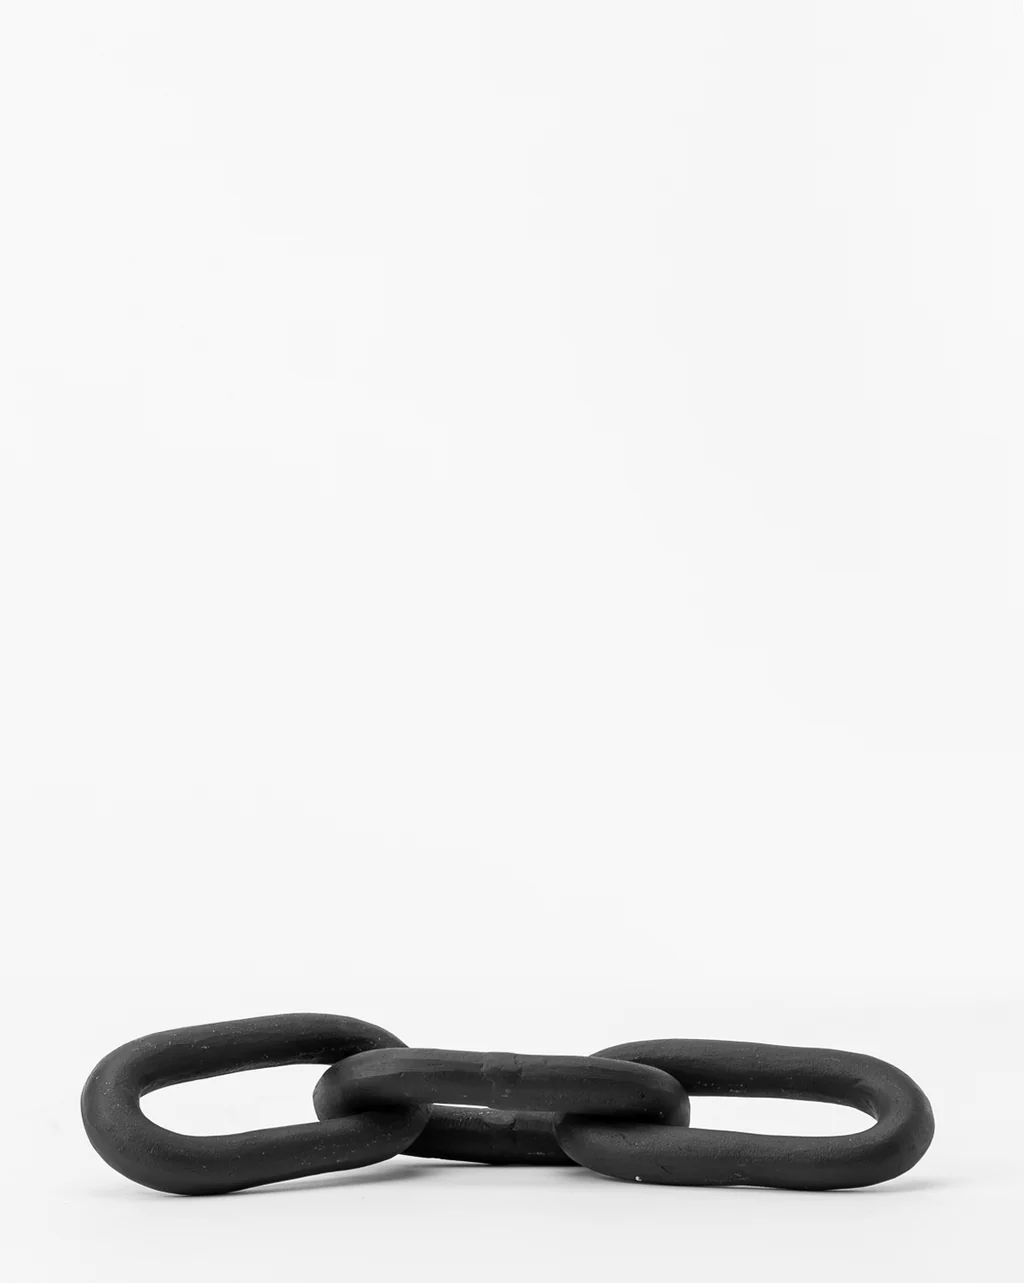 Chain Link Object | McGee & Co.